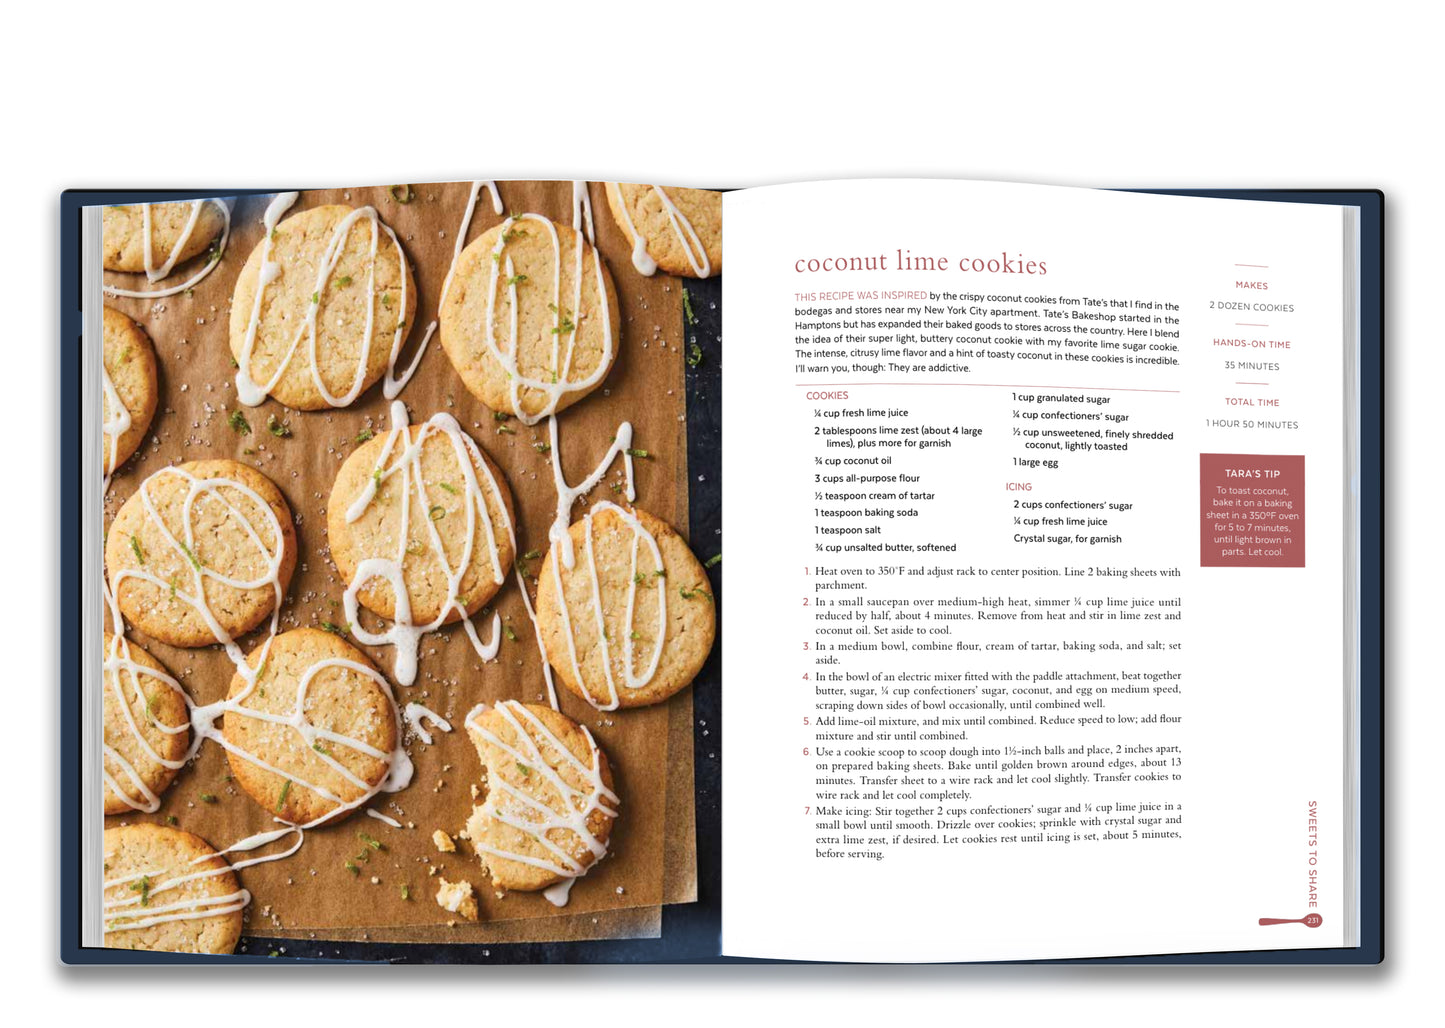 Live Life Deliciously: Recipes For Busy Weeknights, Leisurely Weekends, Coconut Lime Cookies